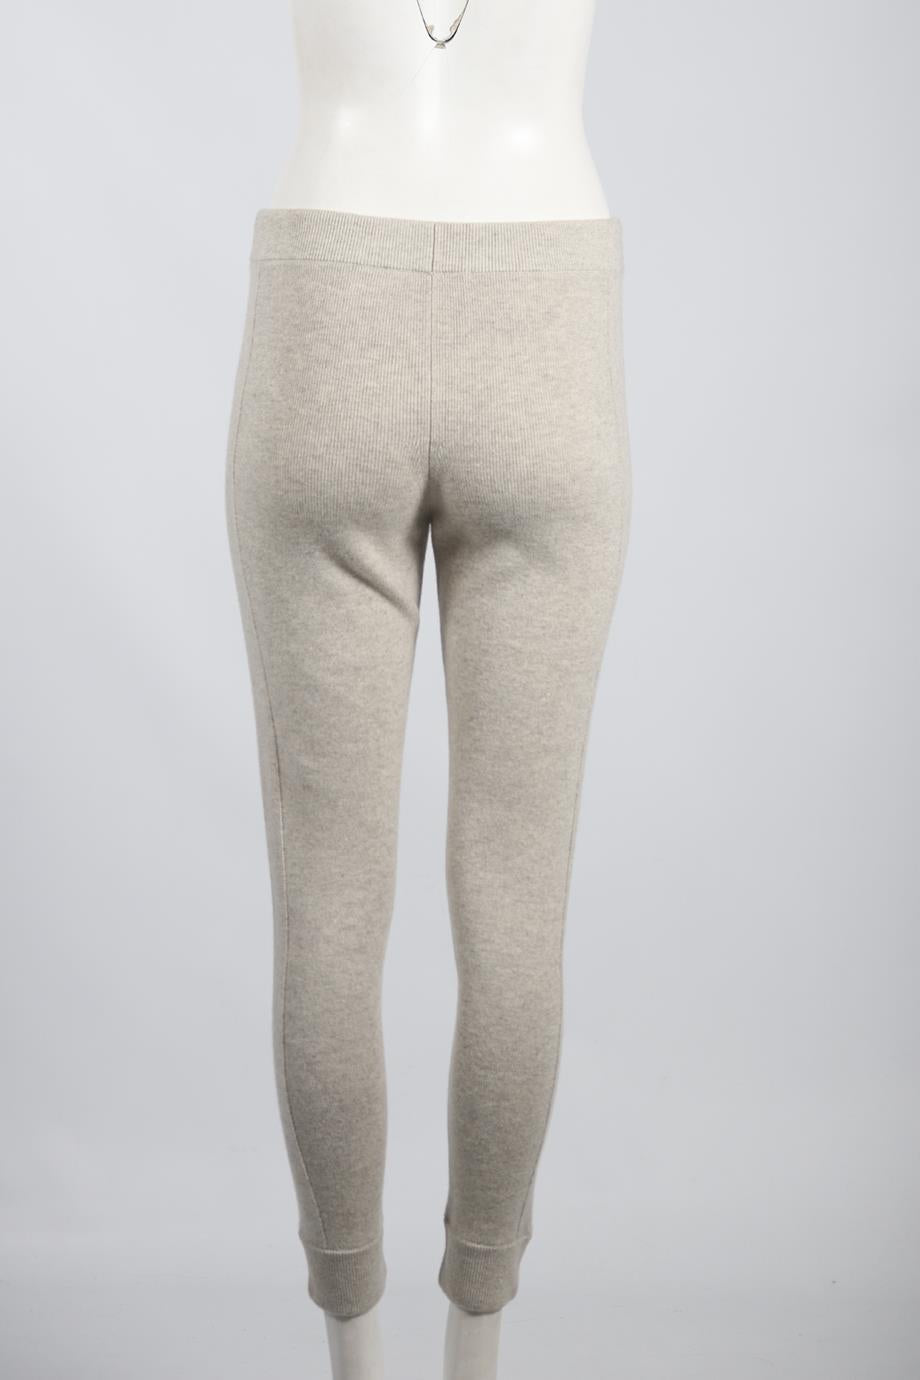 CHLOÉ CASHMERE TAPERED PANTS SMALL